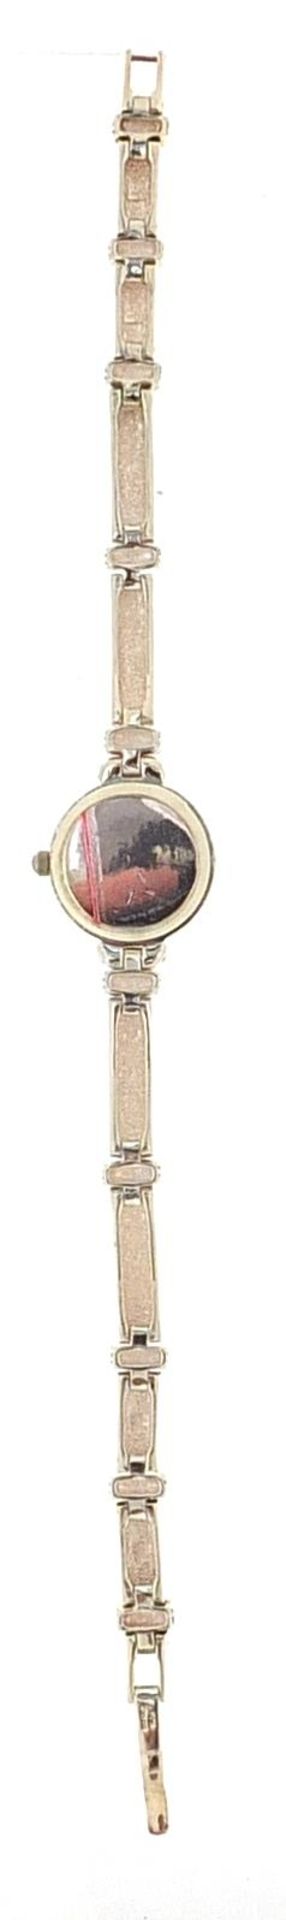 Carvel, ladies silver wristwatch set with clear stones, 19mm in diameter - Image 3 of 7